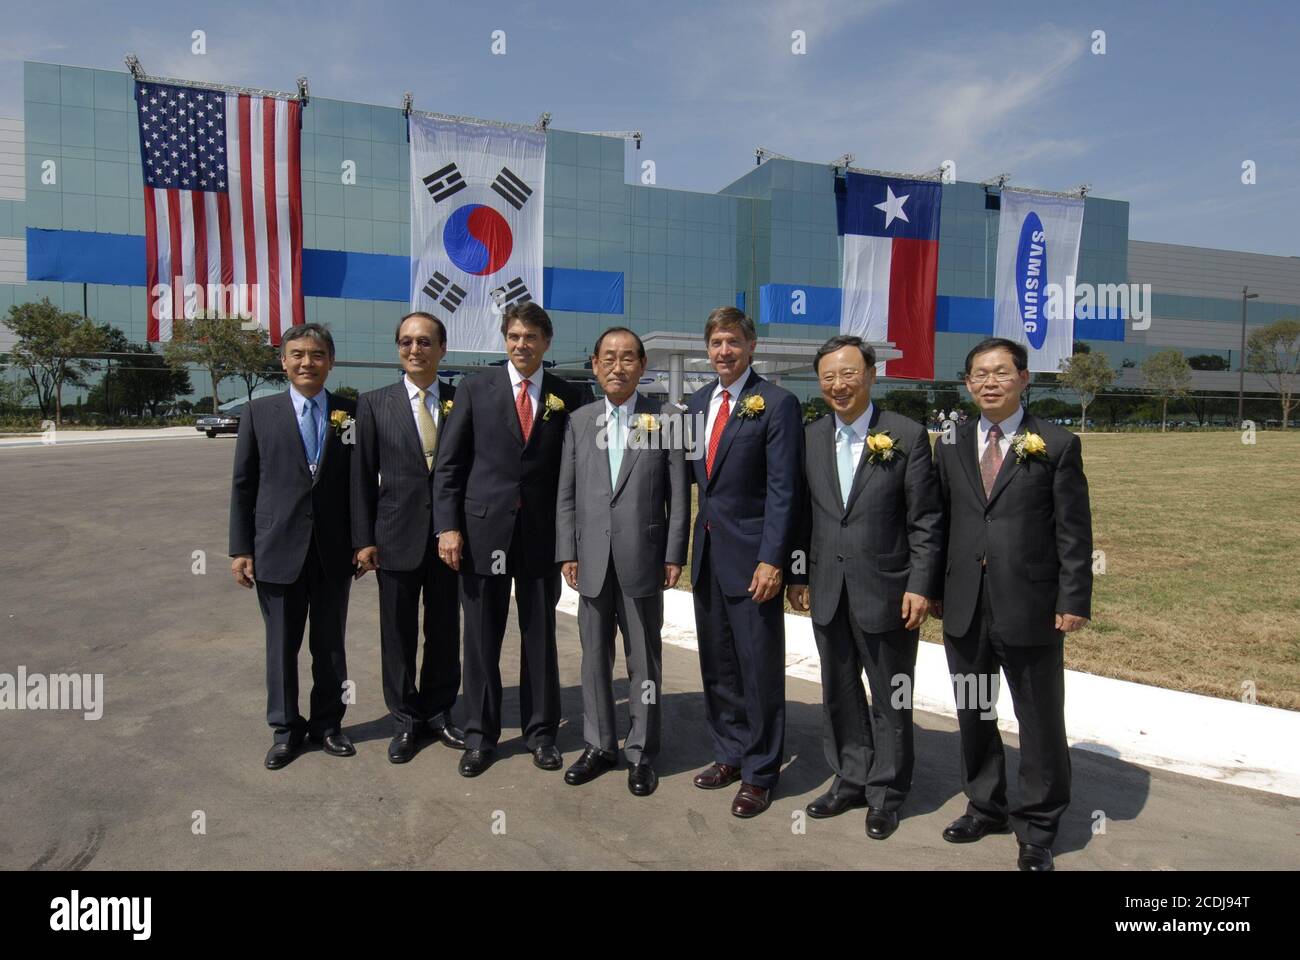 FILE Austin,TX June 14, 2007: Samsung CEO Jong-Yong Yun (c) is flanked by Texas Governor Rick Perry (l) and Mayor Will Wynn (r) at grand opening ceremonies at Samsung Austin Semiconductor (SAS) for 'Fab 2' manufacturing facility showcasing the Korean chip manufacturer's multi-billion-dollar U.S. investment. ©Bob Daemmrich Stock Photo